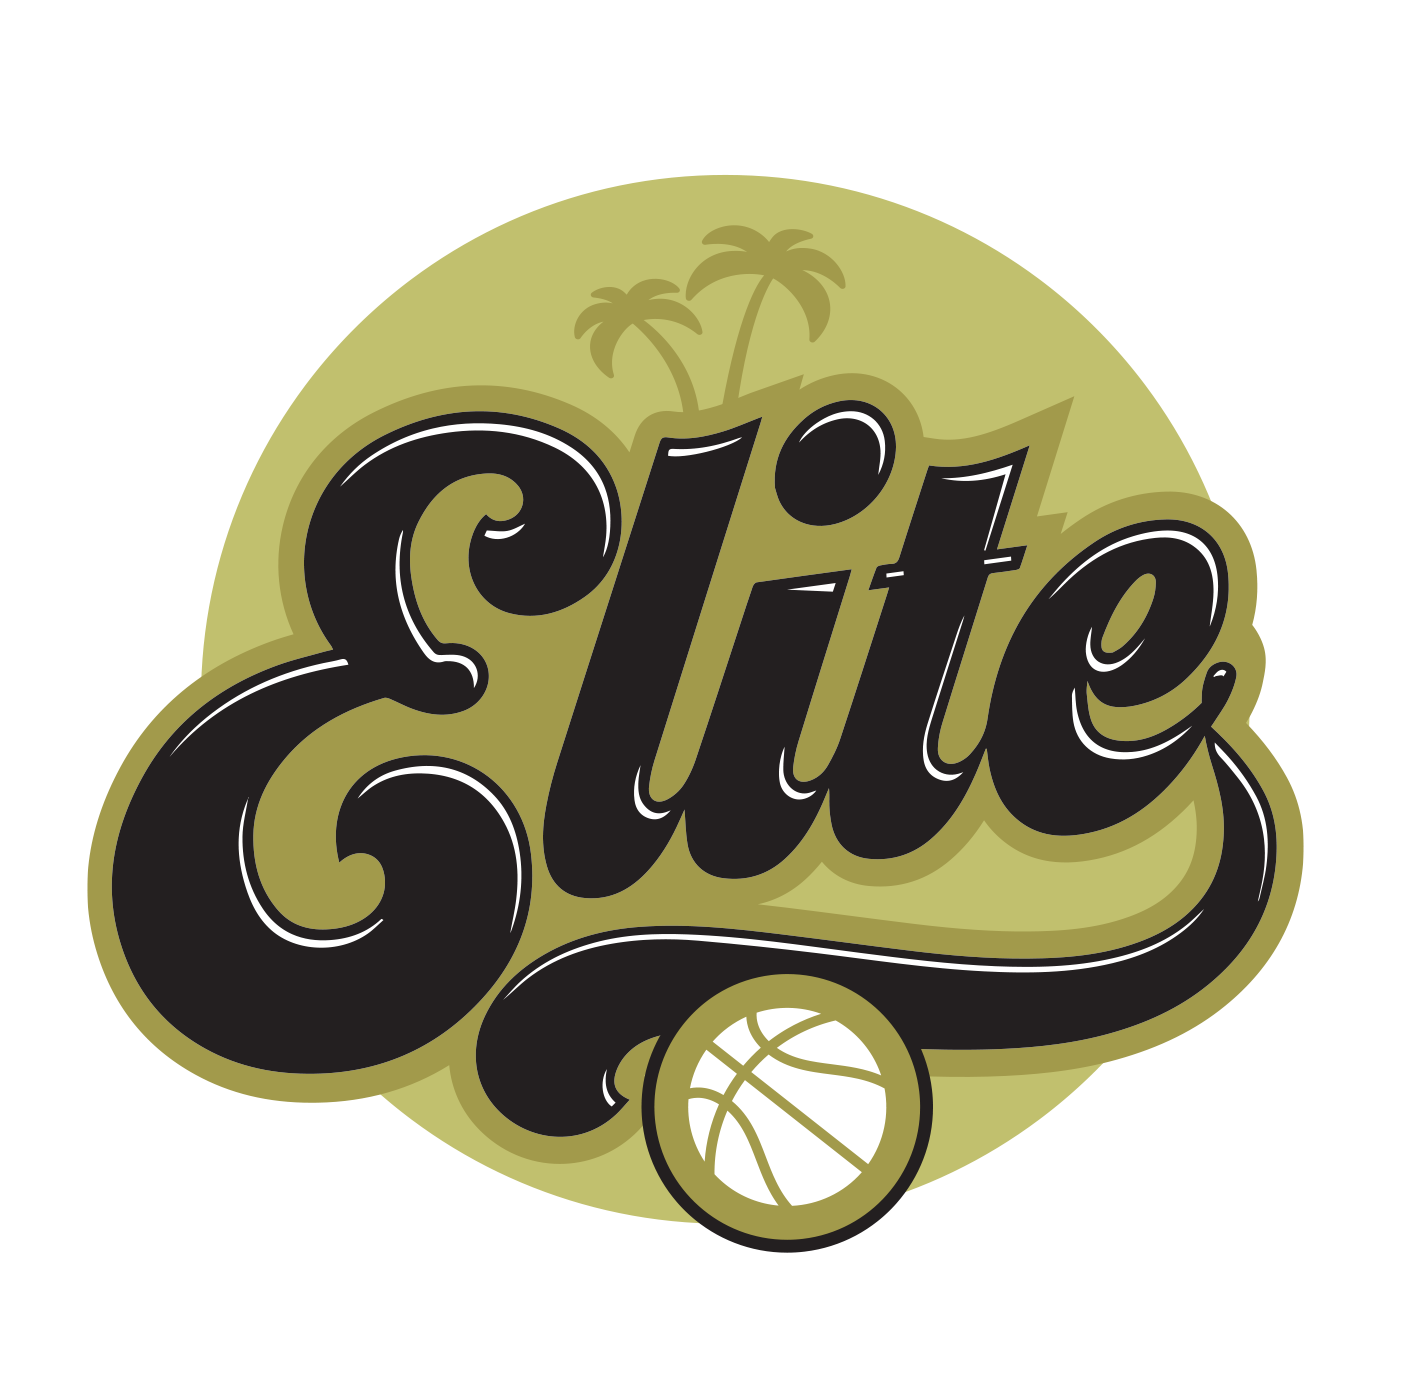 WELCOME TO LOS ANGELES ELITE